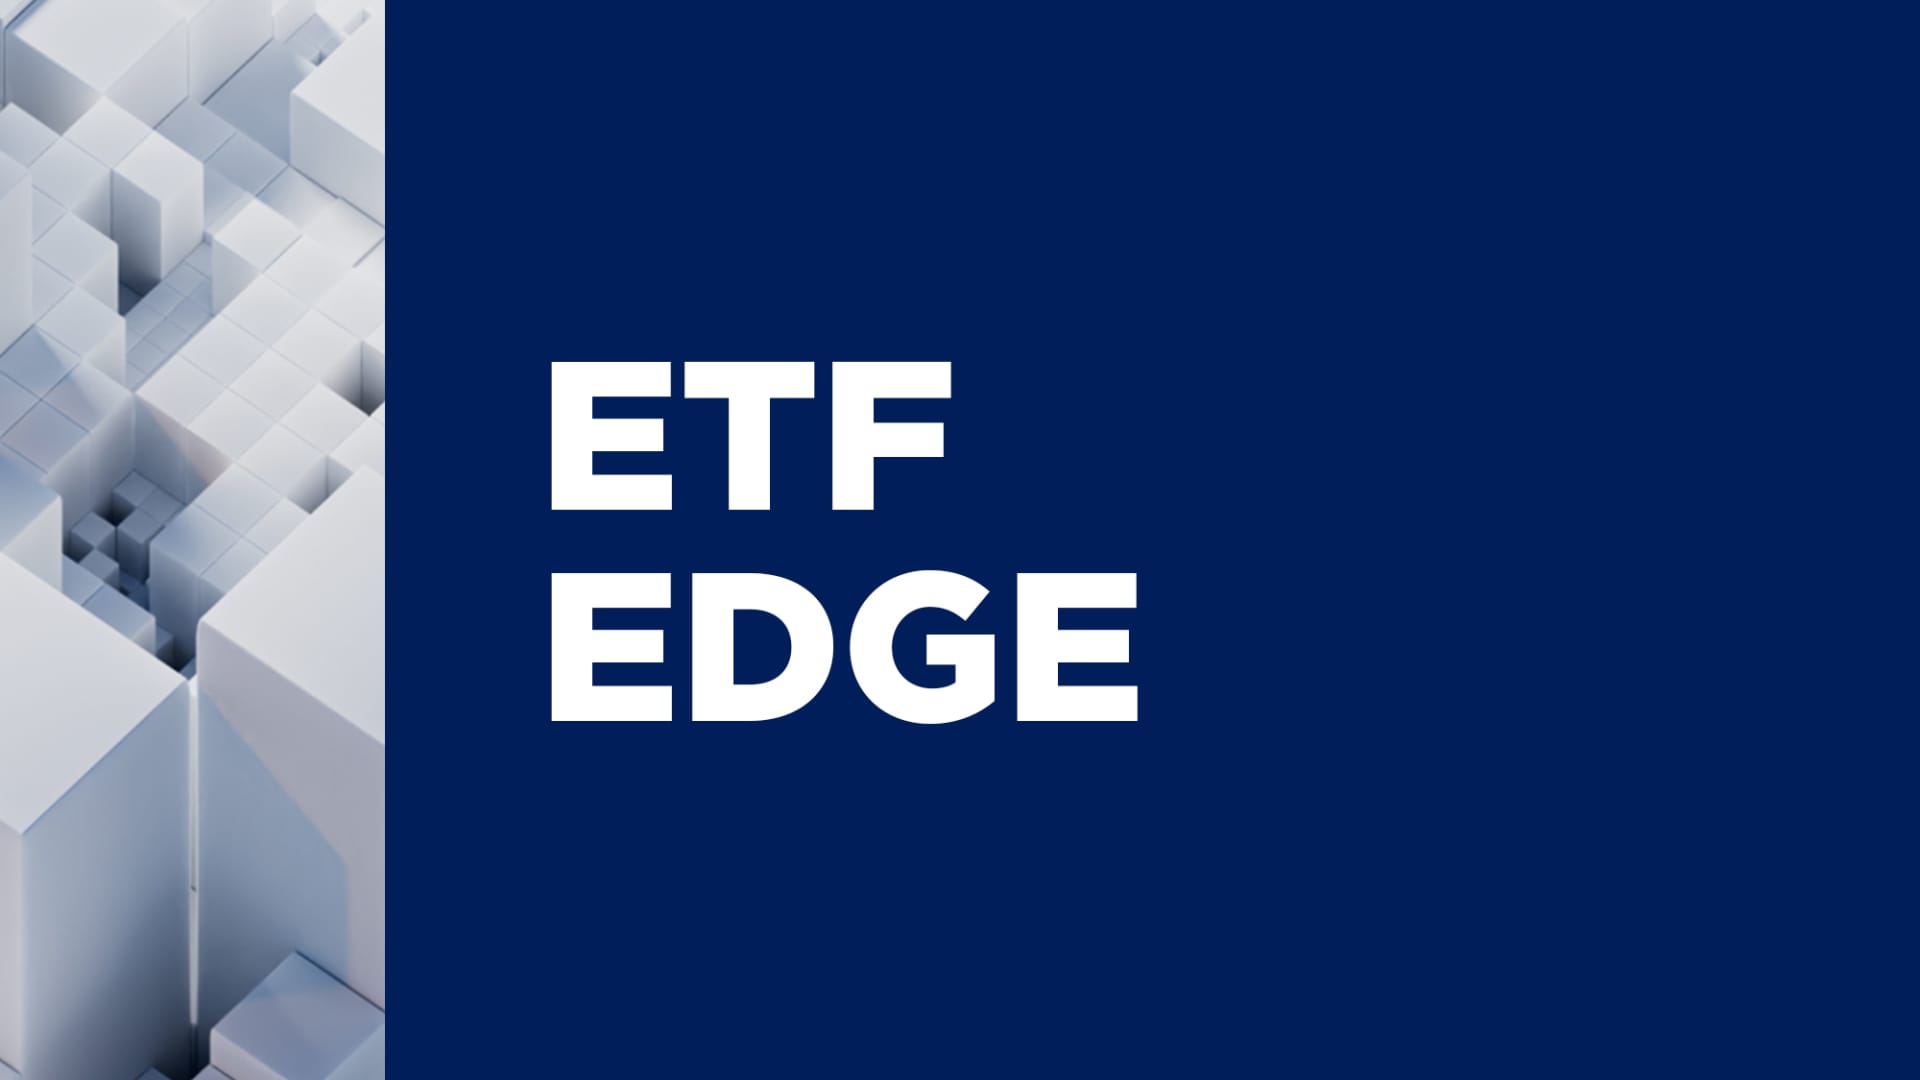 Watch now: ETF Edge on the remarkable flows in semiconductors